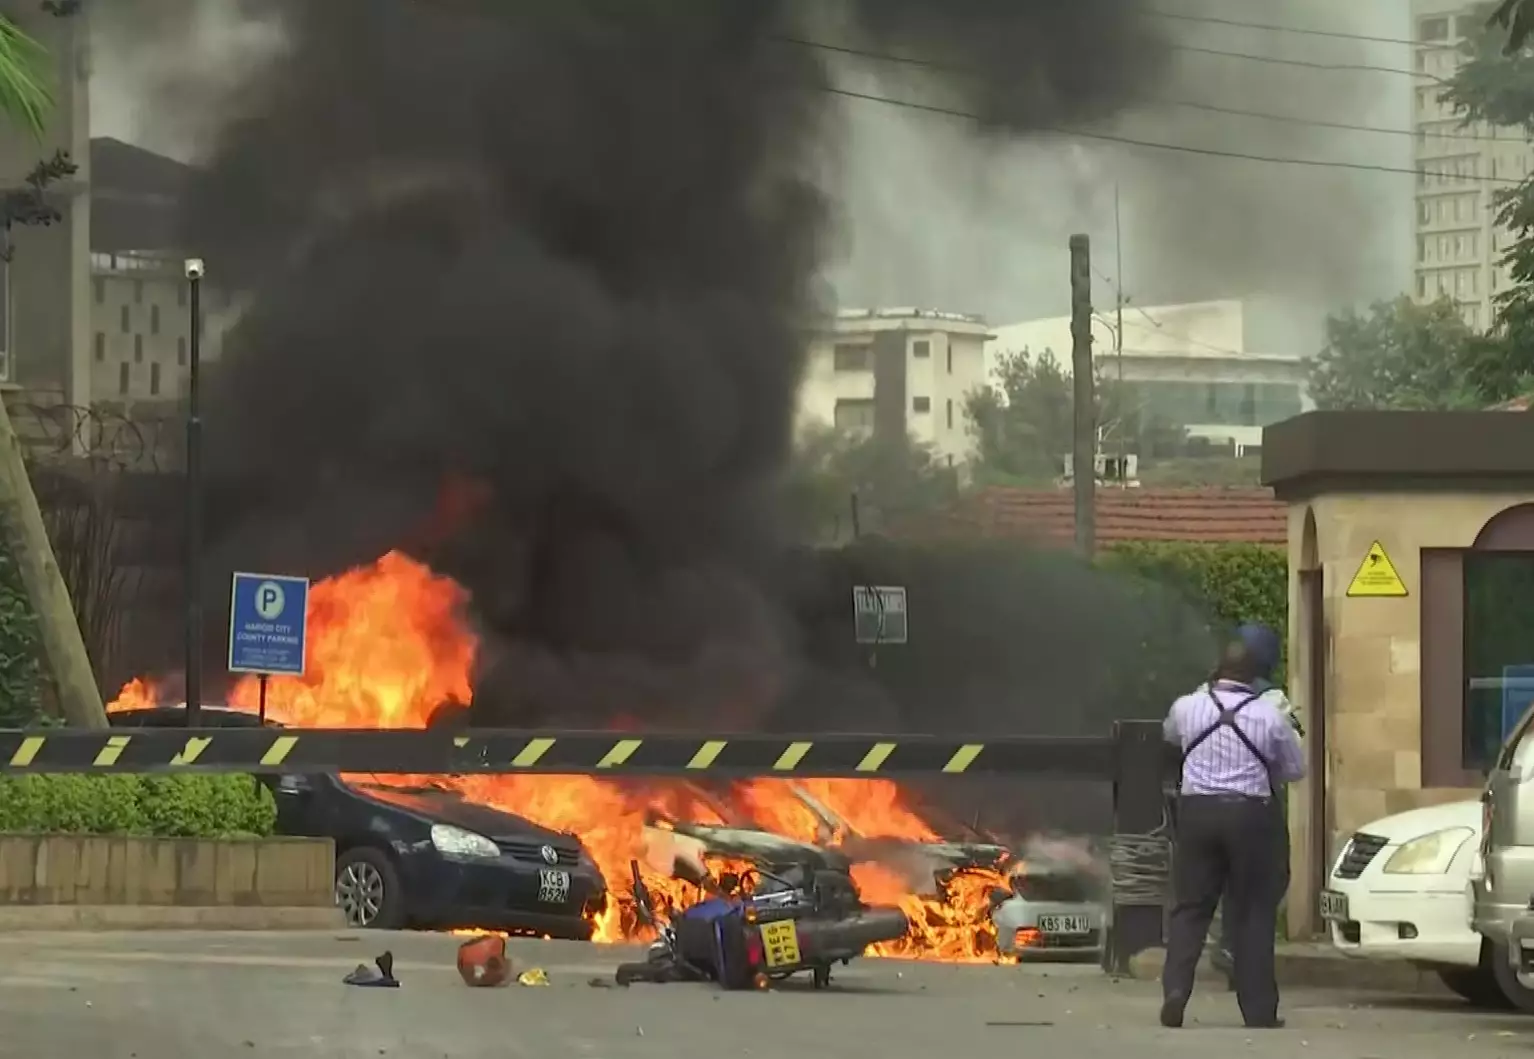 The attack in Nairobi left 14 people confirmed dead.